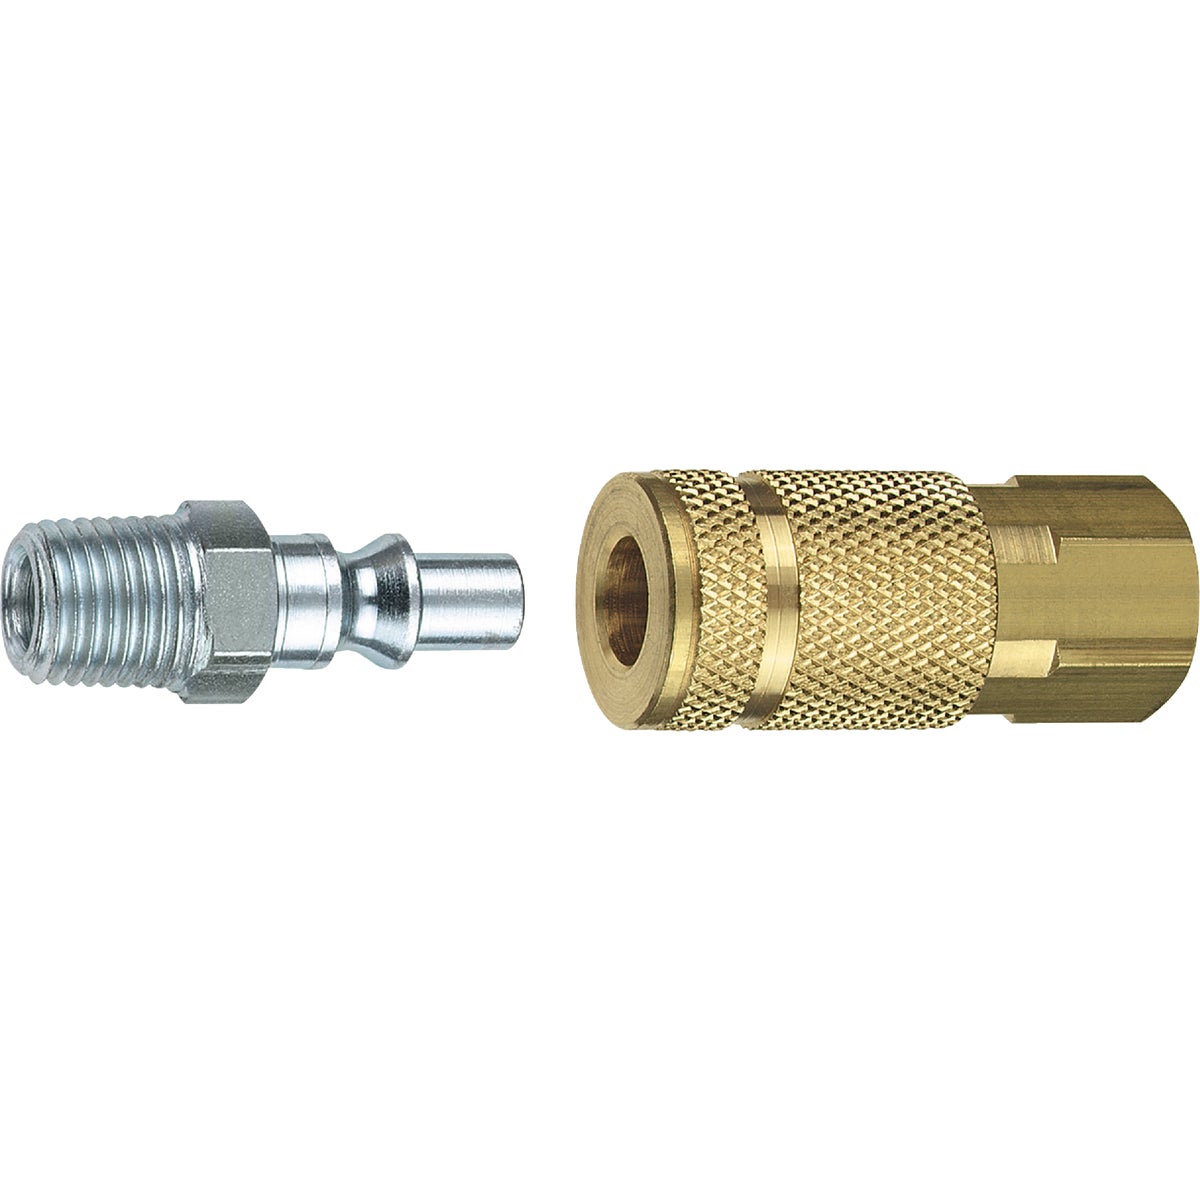 Item 570274, For compressed air lines, 300 psi (pounds per square inch) maximum rated 